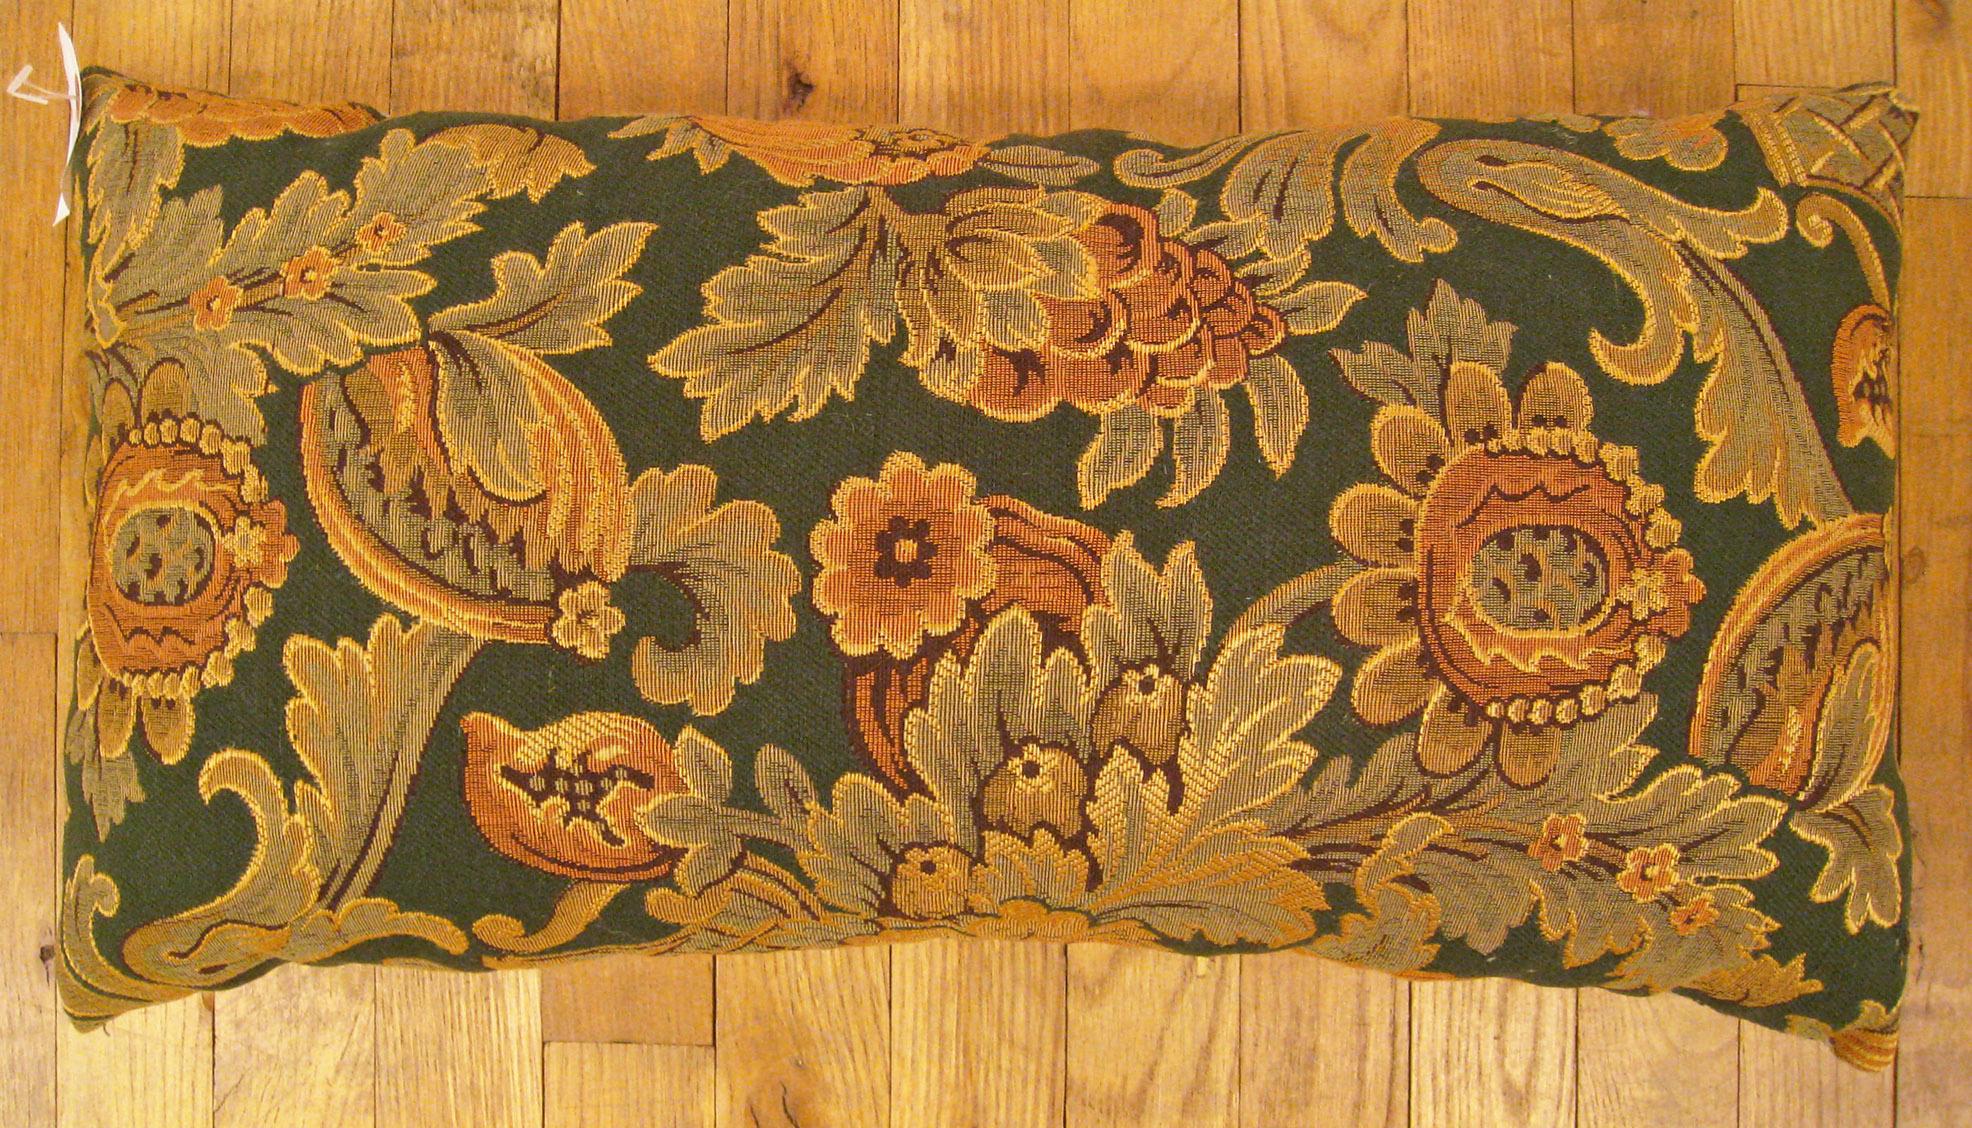 Antique Jacquard Tapestry Pillow; size 1'0” x 1'11”.

An antique decorative pillow with floral elements allover a gold green central field, size 1'0